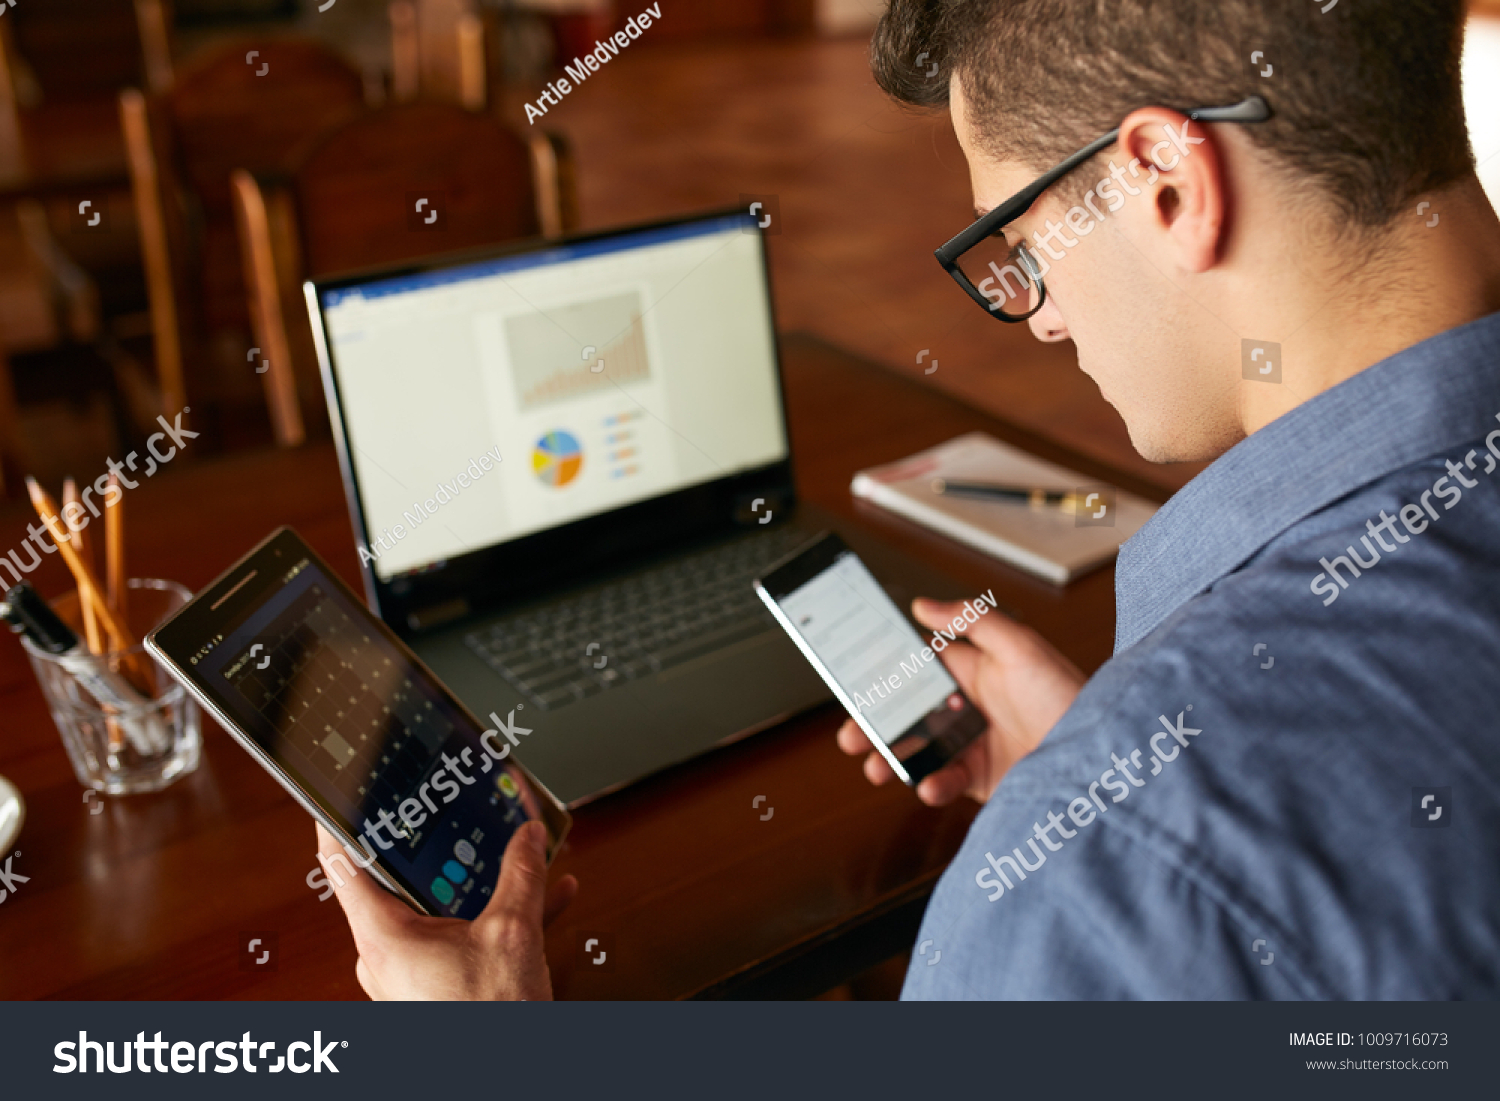 Attractive man in glasses working with multiple electronic internet devices. Freelancer businessman has laptop and smartphone in hands and laptop on table with charts on screen. Multitasking theme. #1009716073